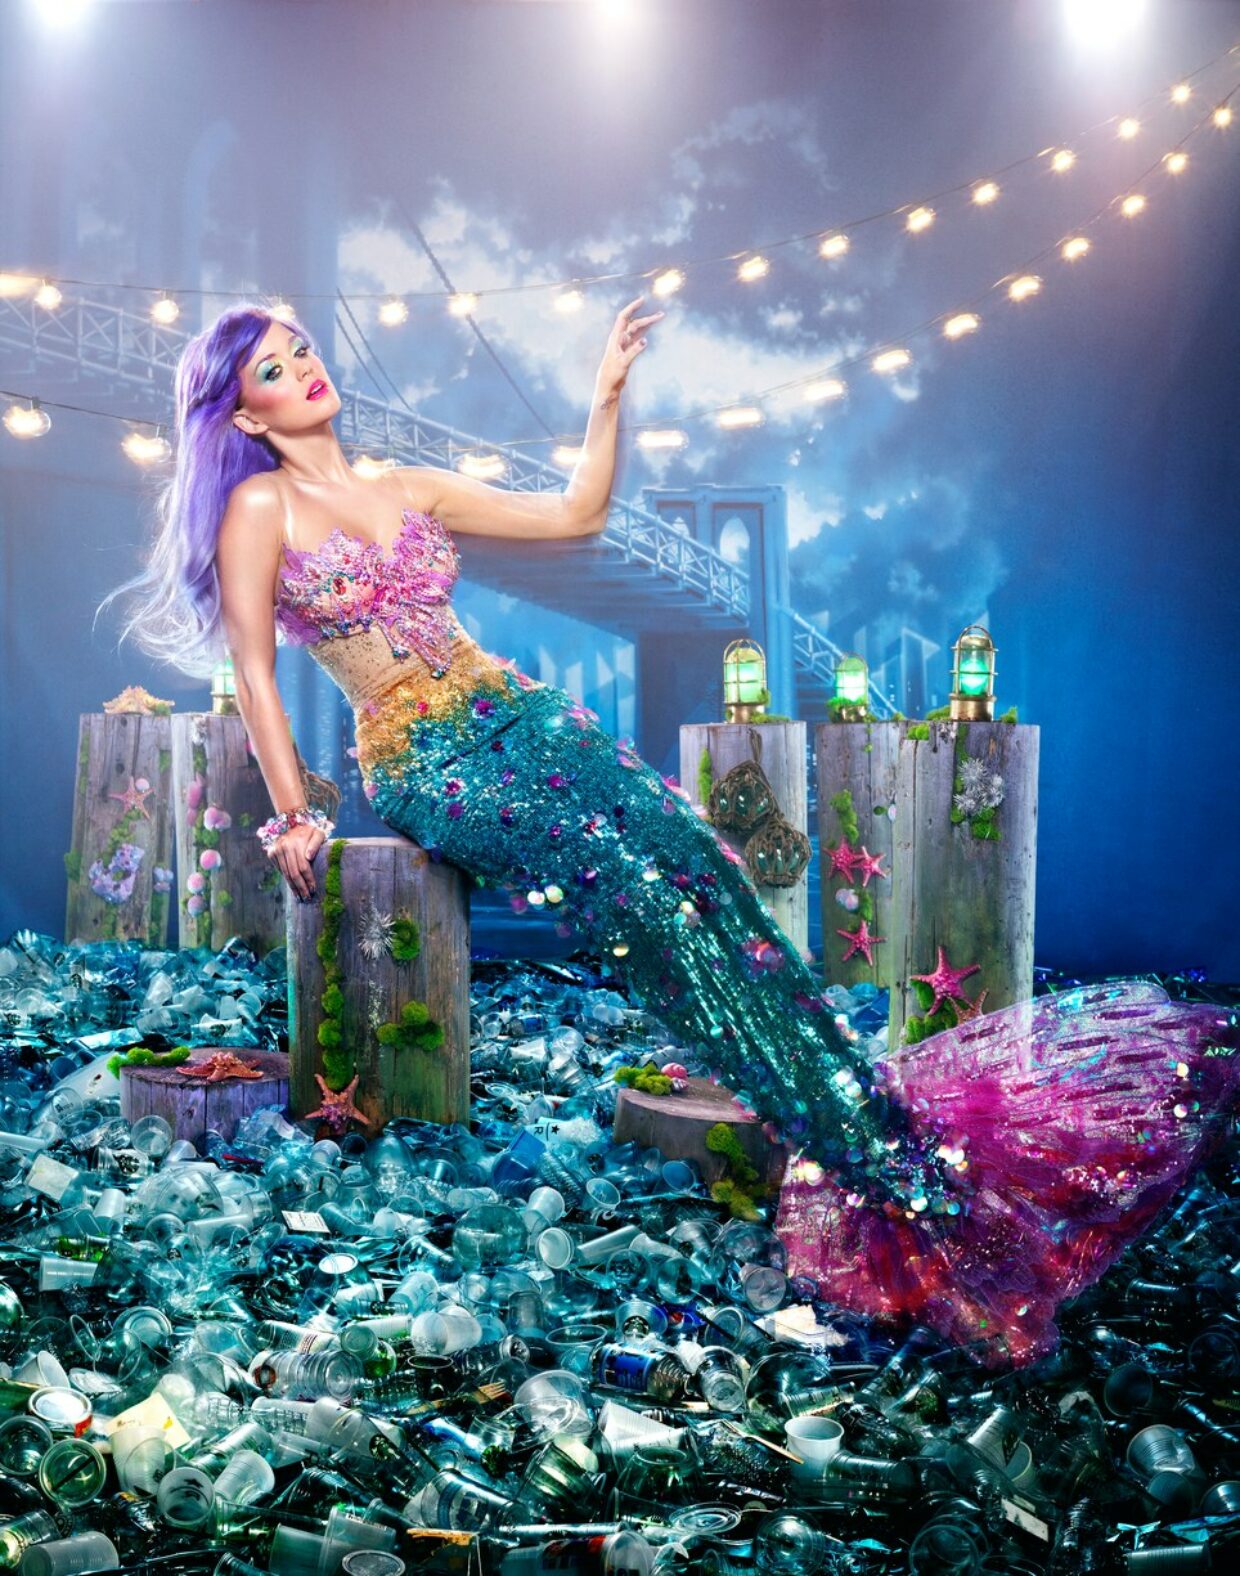 What Can David LaChapelle’s Celebrity-Fuelled Fantasias Tell Us Now? | 5